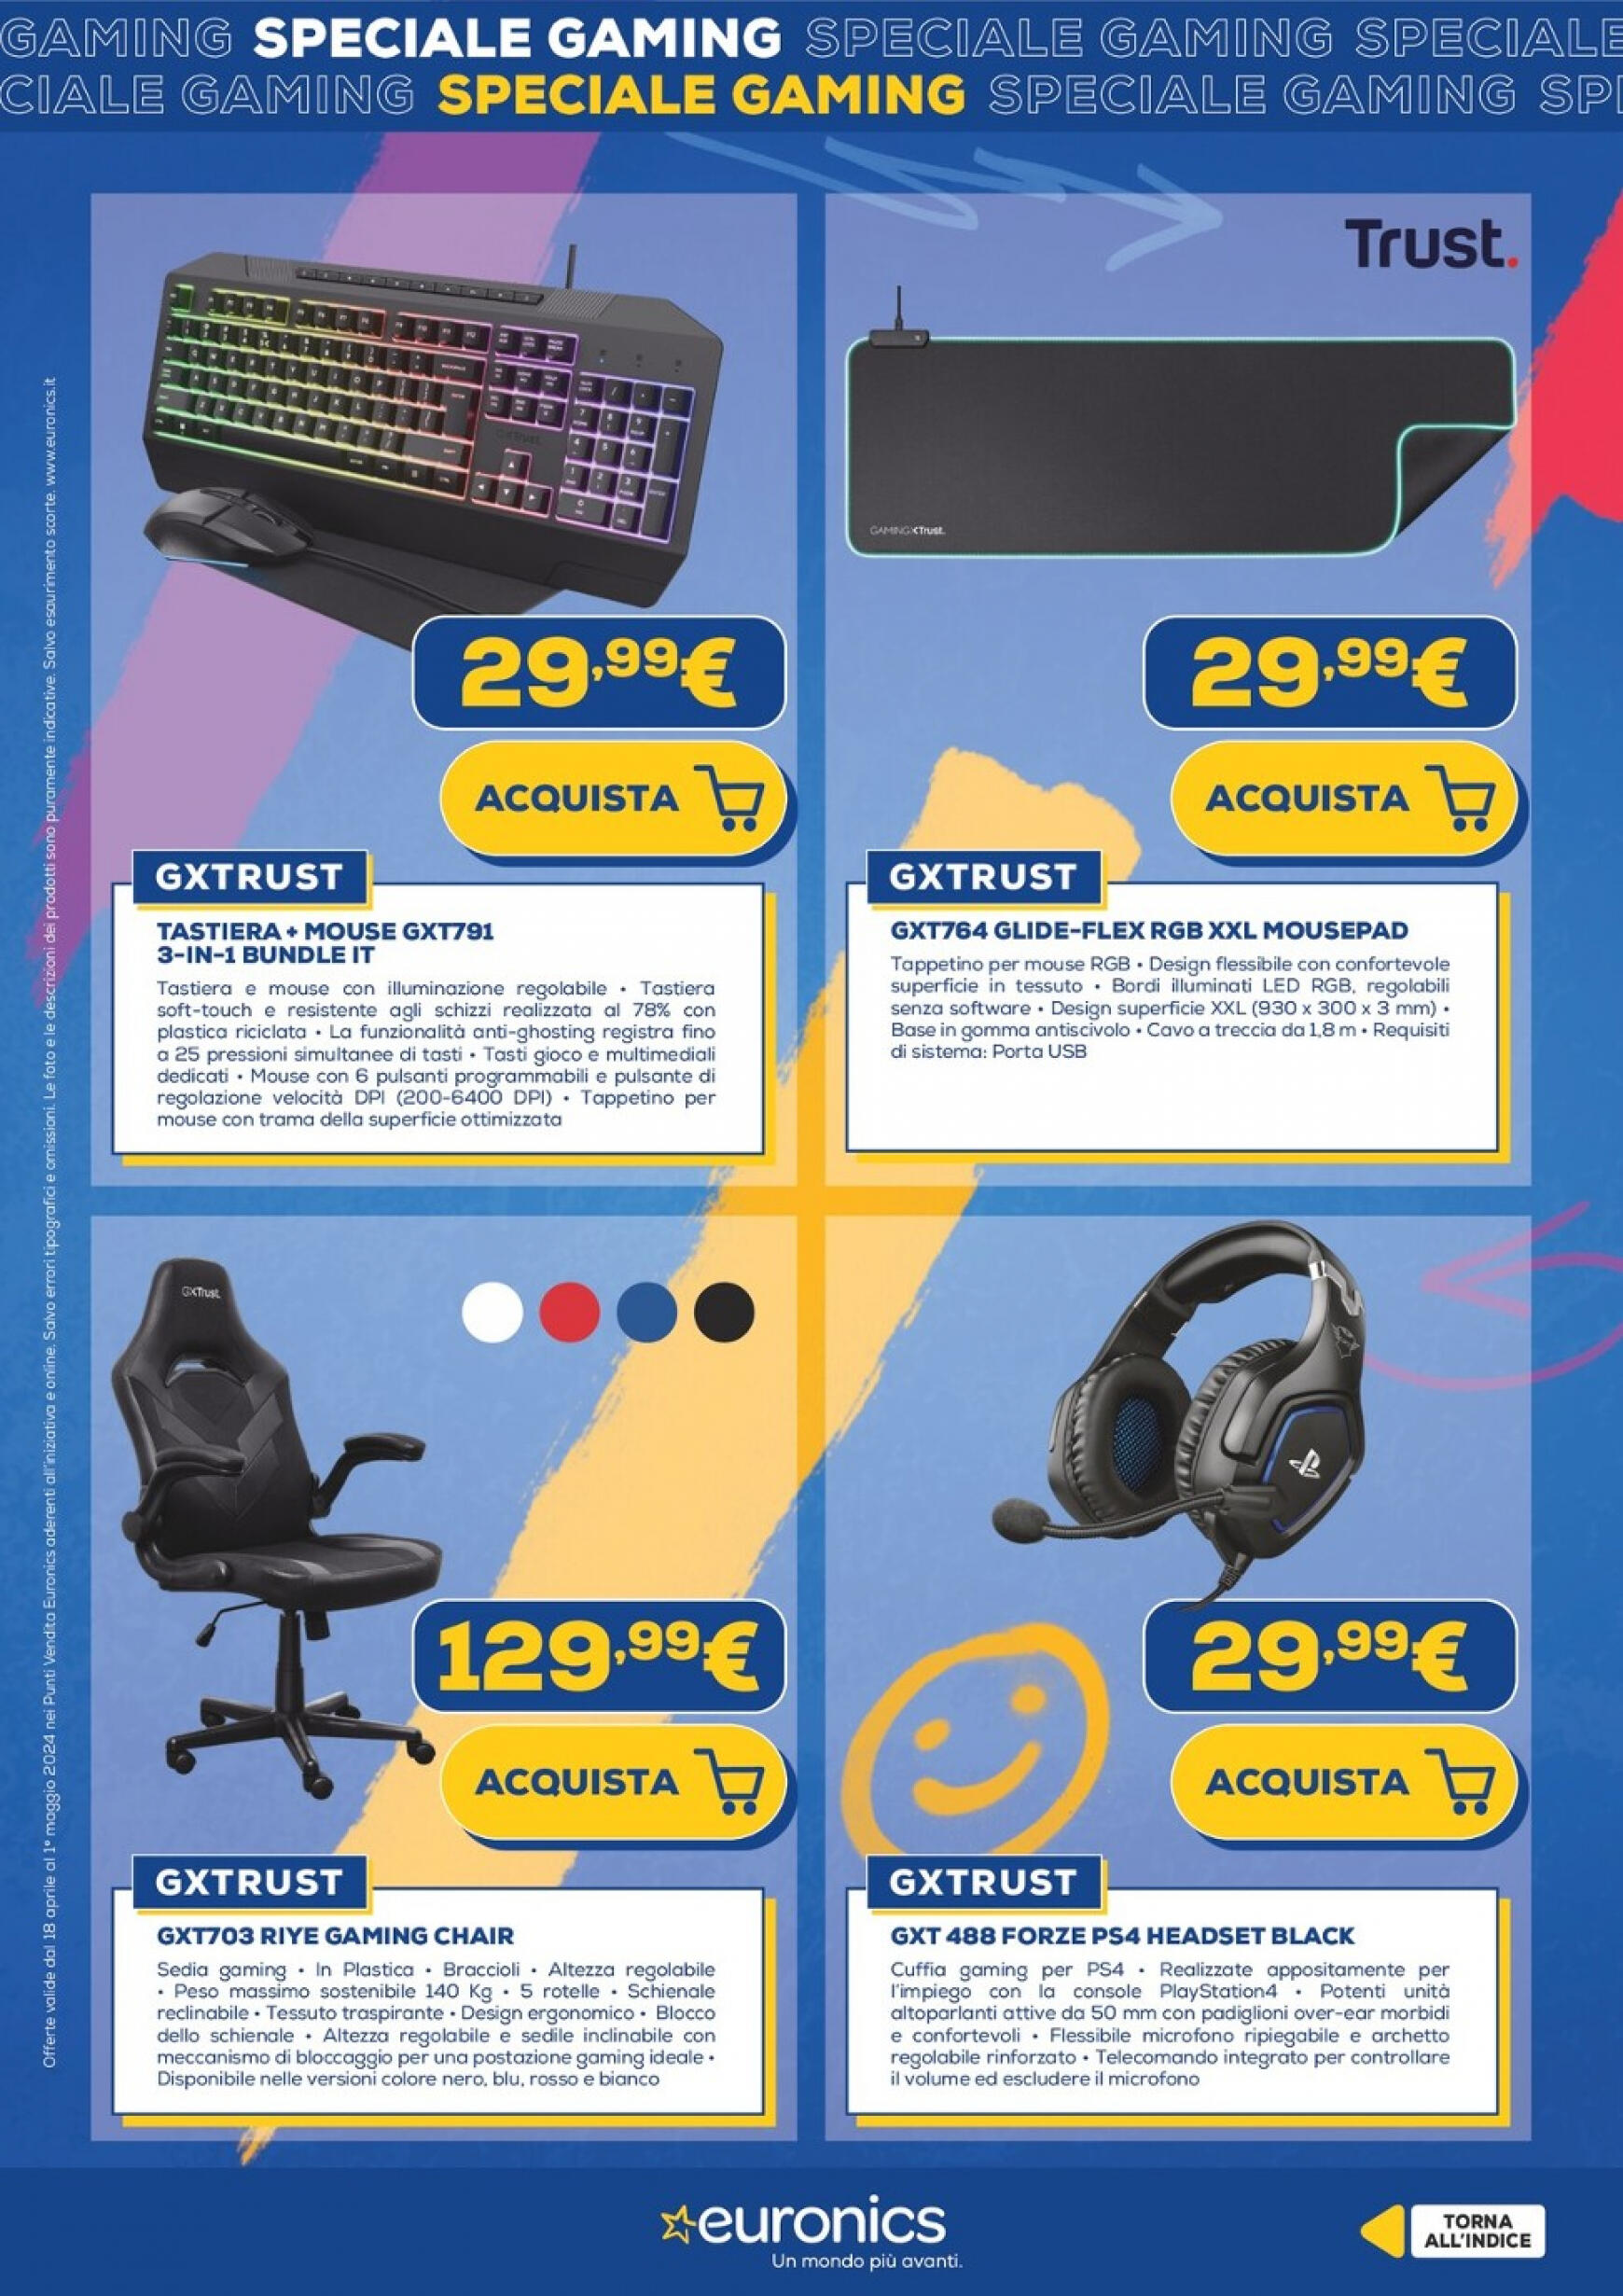 euronics - Nuovo volantino Euronics - Speciale Gaming 18.04. - 01.05. - page: 14